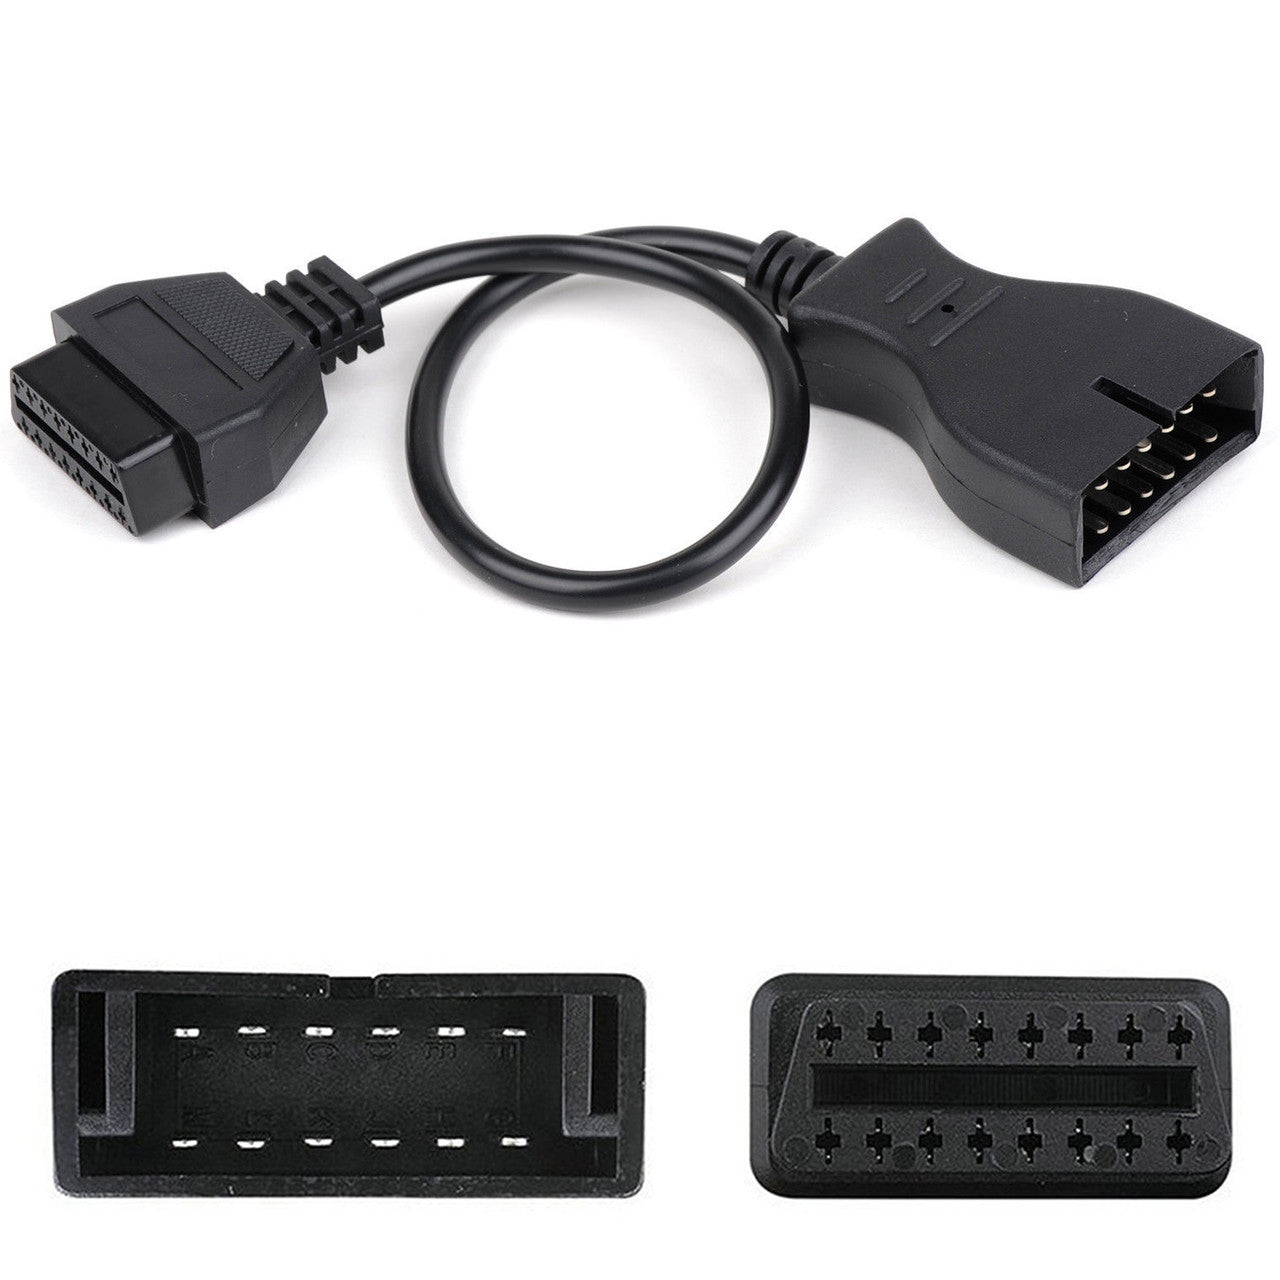 GM 12 Pin To OBD1 OBD2 OBD-II 16 Pin Adapter Connector Car Motor Diagnostic Tool Diagnostics Adapter Cable Connector for GM Vehicle